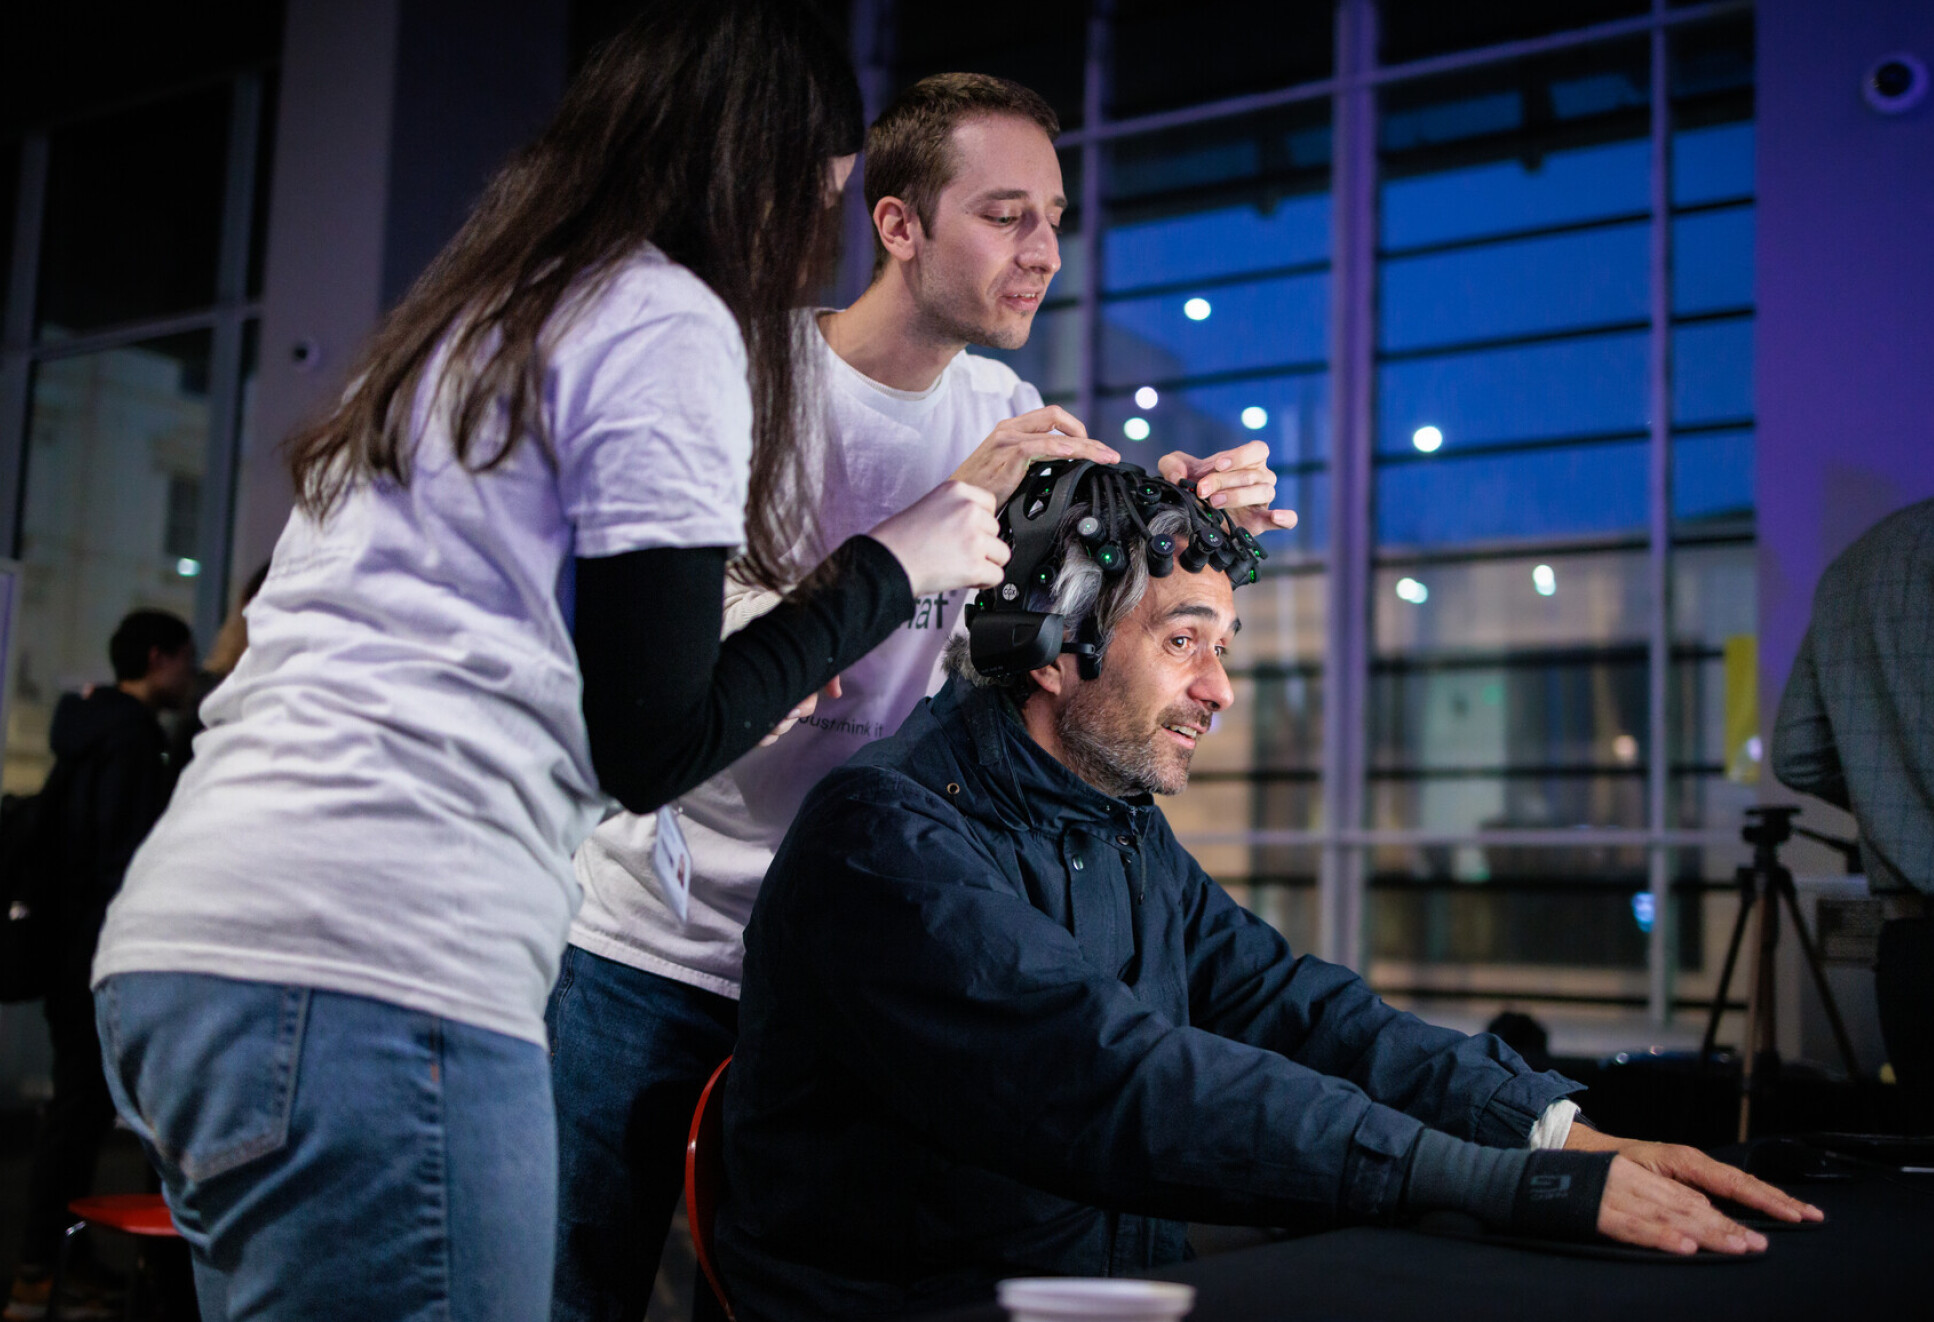 Two volunteers place headset on male visitor sitting down